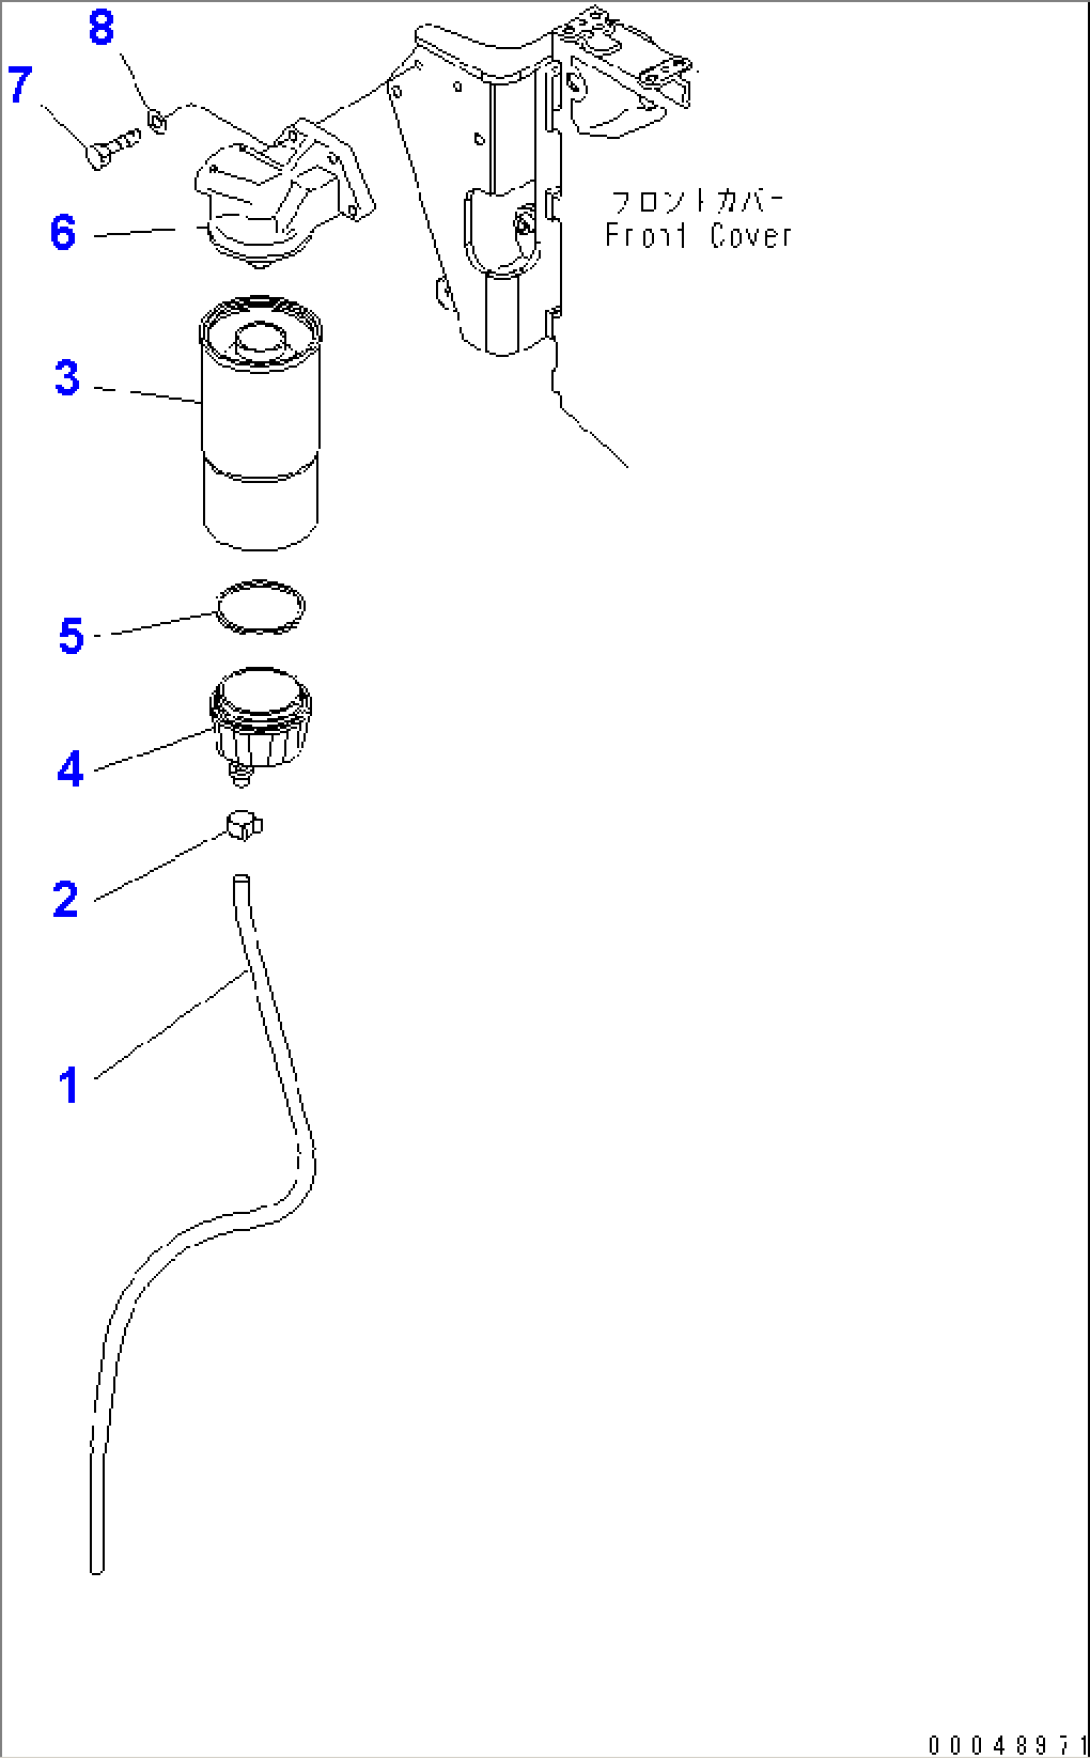 FUEL TANK (WATER SEPARATOR PIPING AND FILTER)(#55001-)